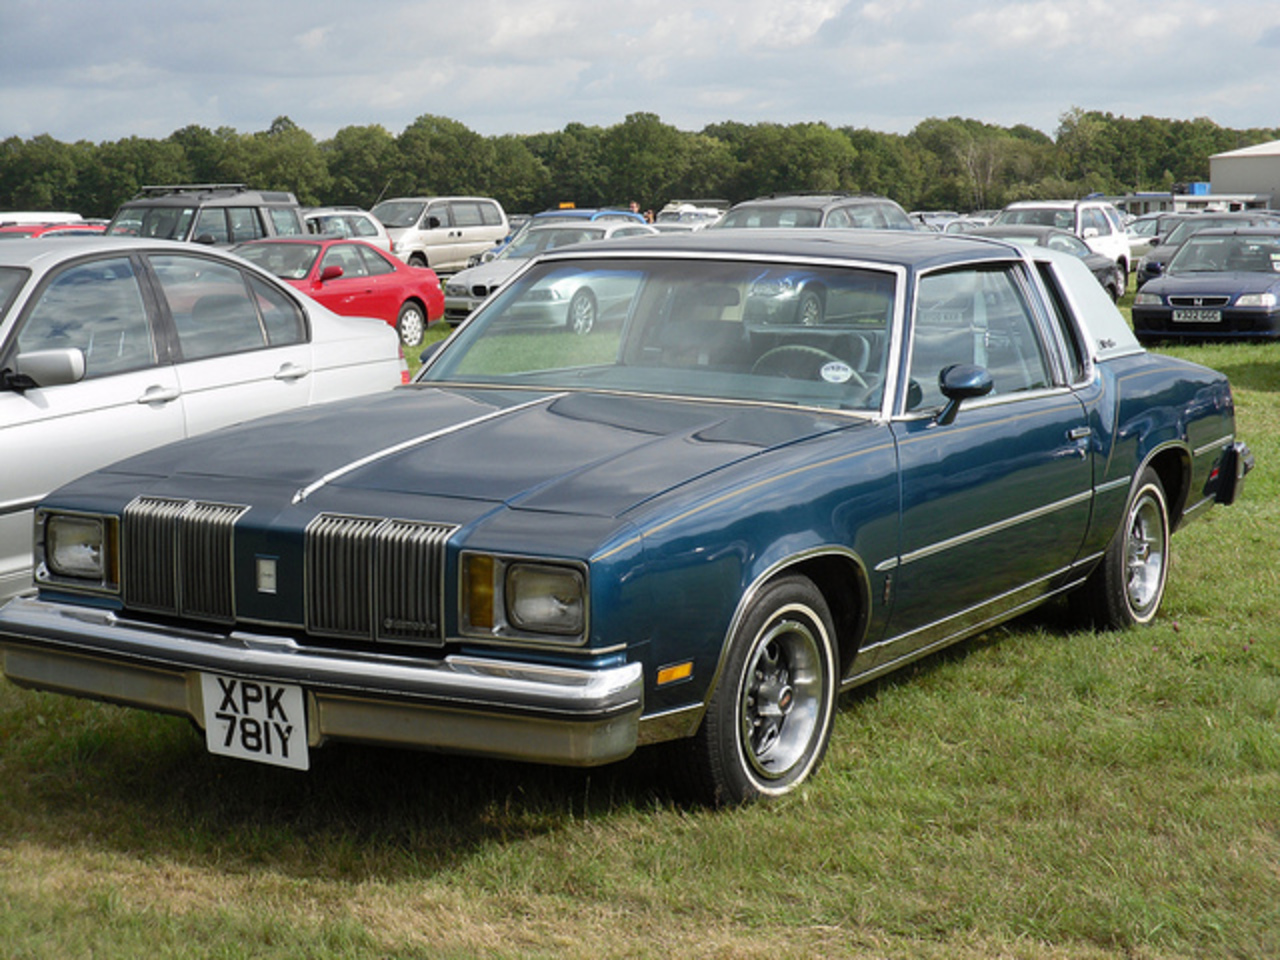 1979 Oldsmobile Cutlass Supreme Coupe. | Flickr - Photo Sharing!